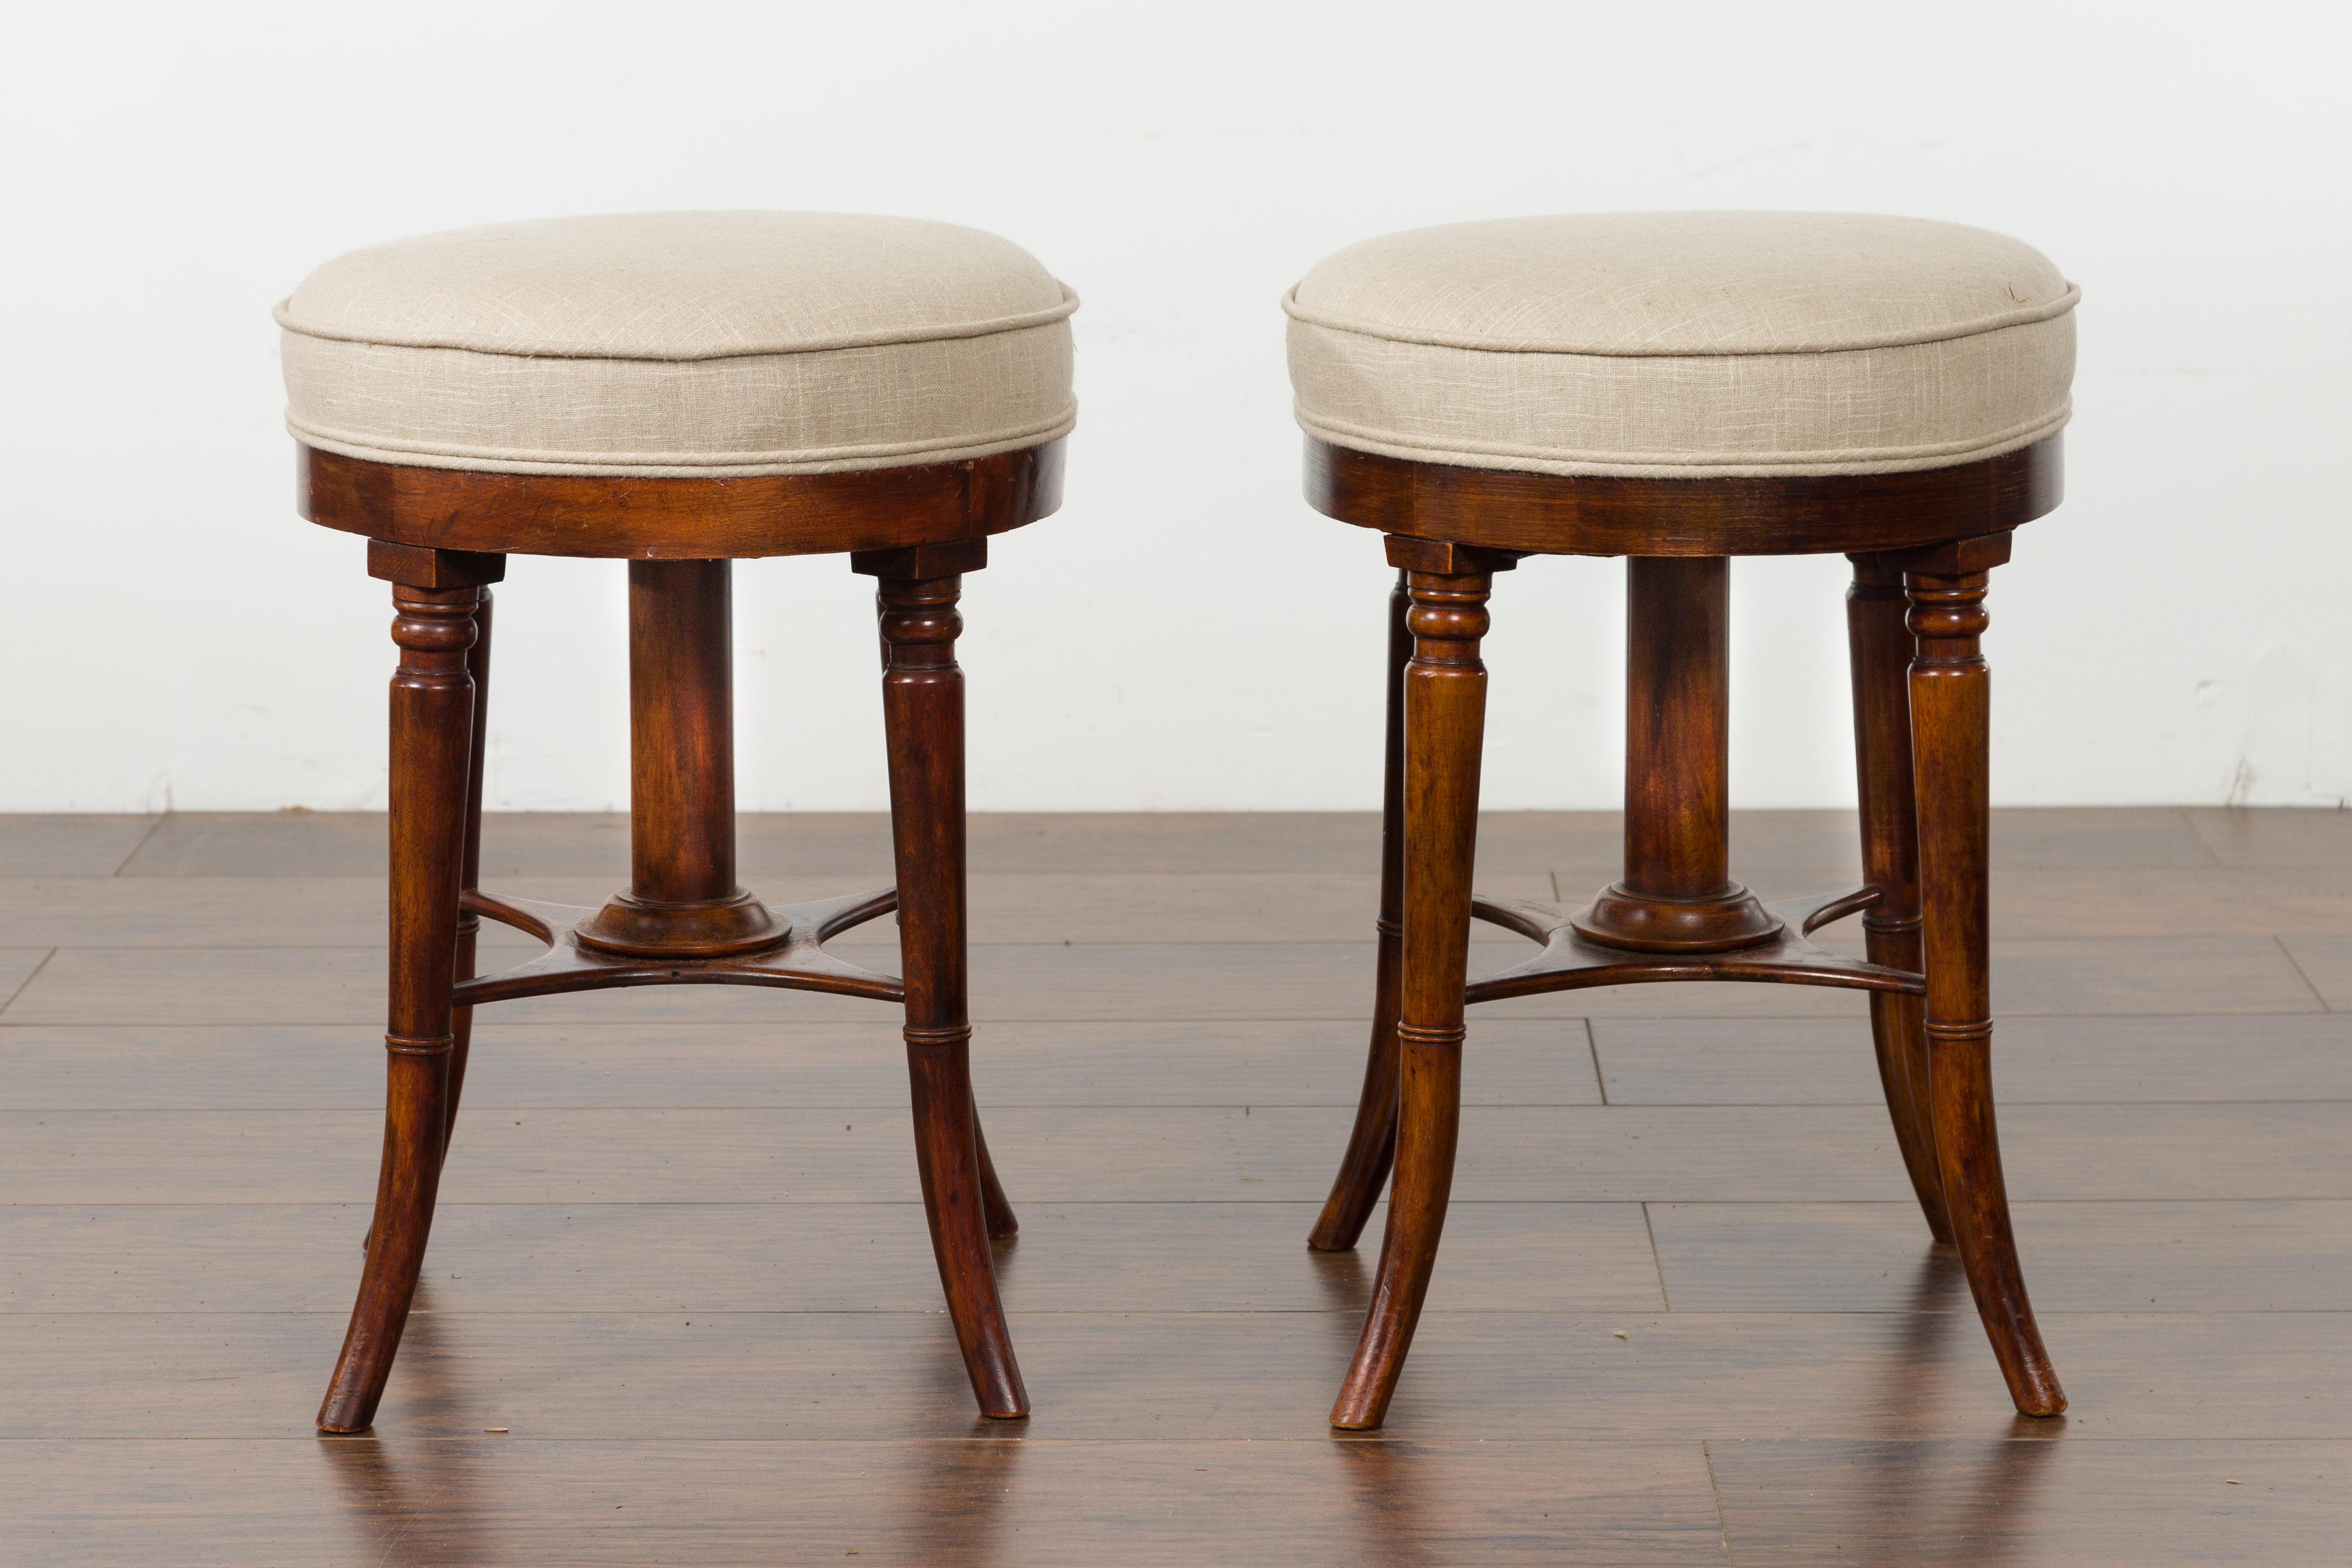 A pair of English mahogany stools from the early 20th century, with turned saber legs and new upholstery. Created in England during the first quarter of the 20th century, each of this pair of mahogany stools features a circular top, newly